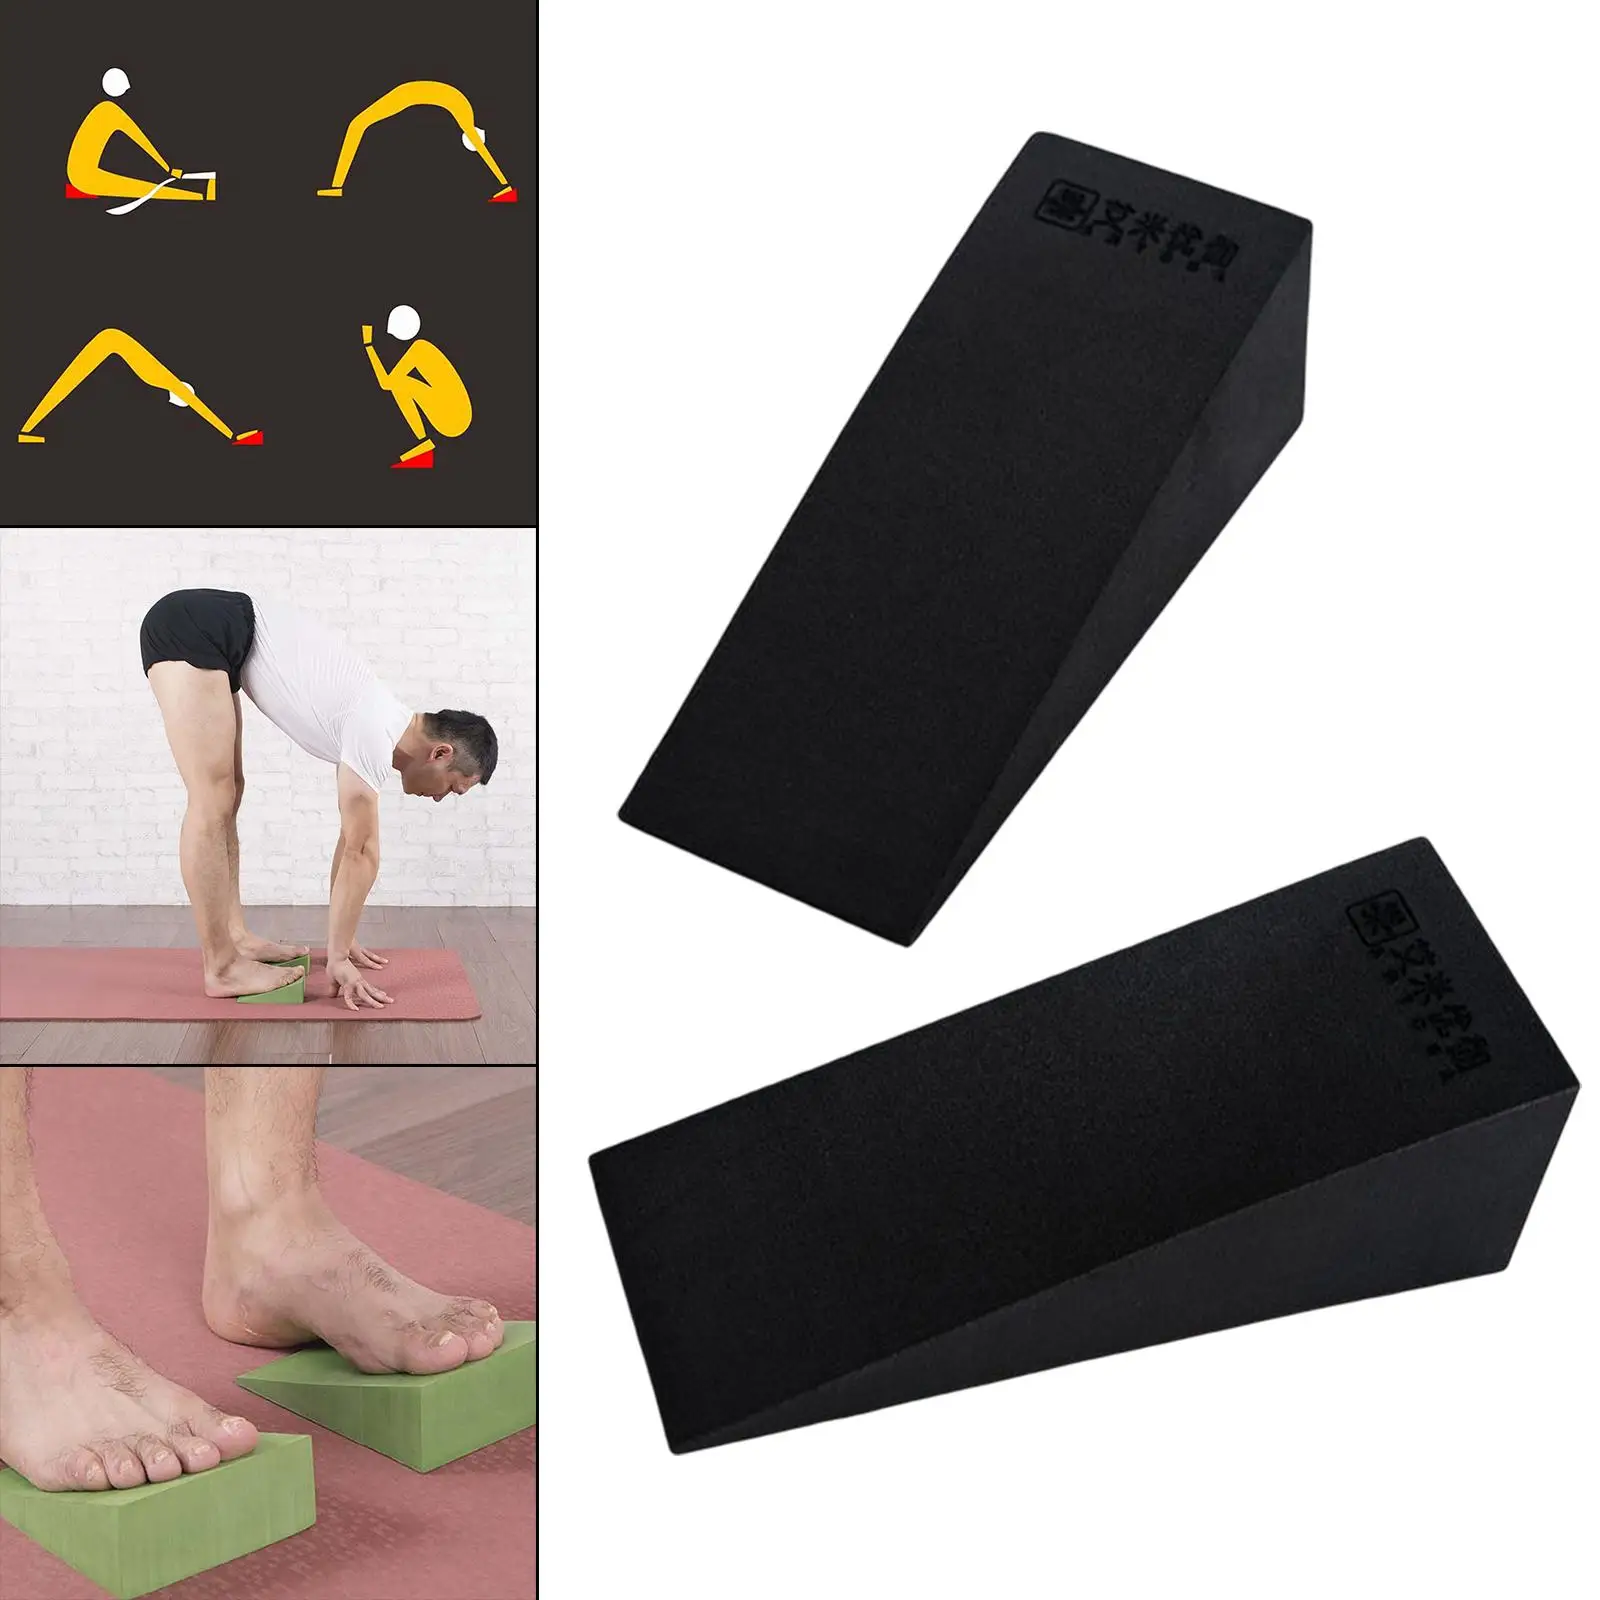 Yoga Blocks Knee Pad Accs Wrist Wedge Squat Wedge Exercise for Stretching